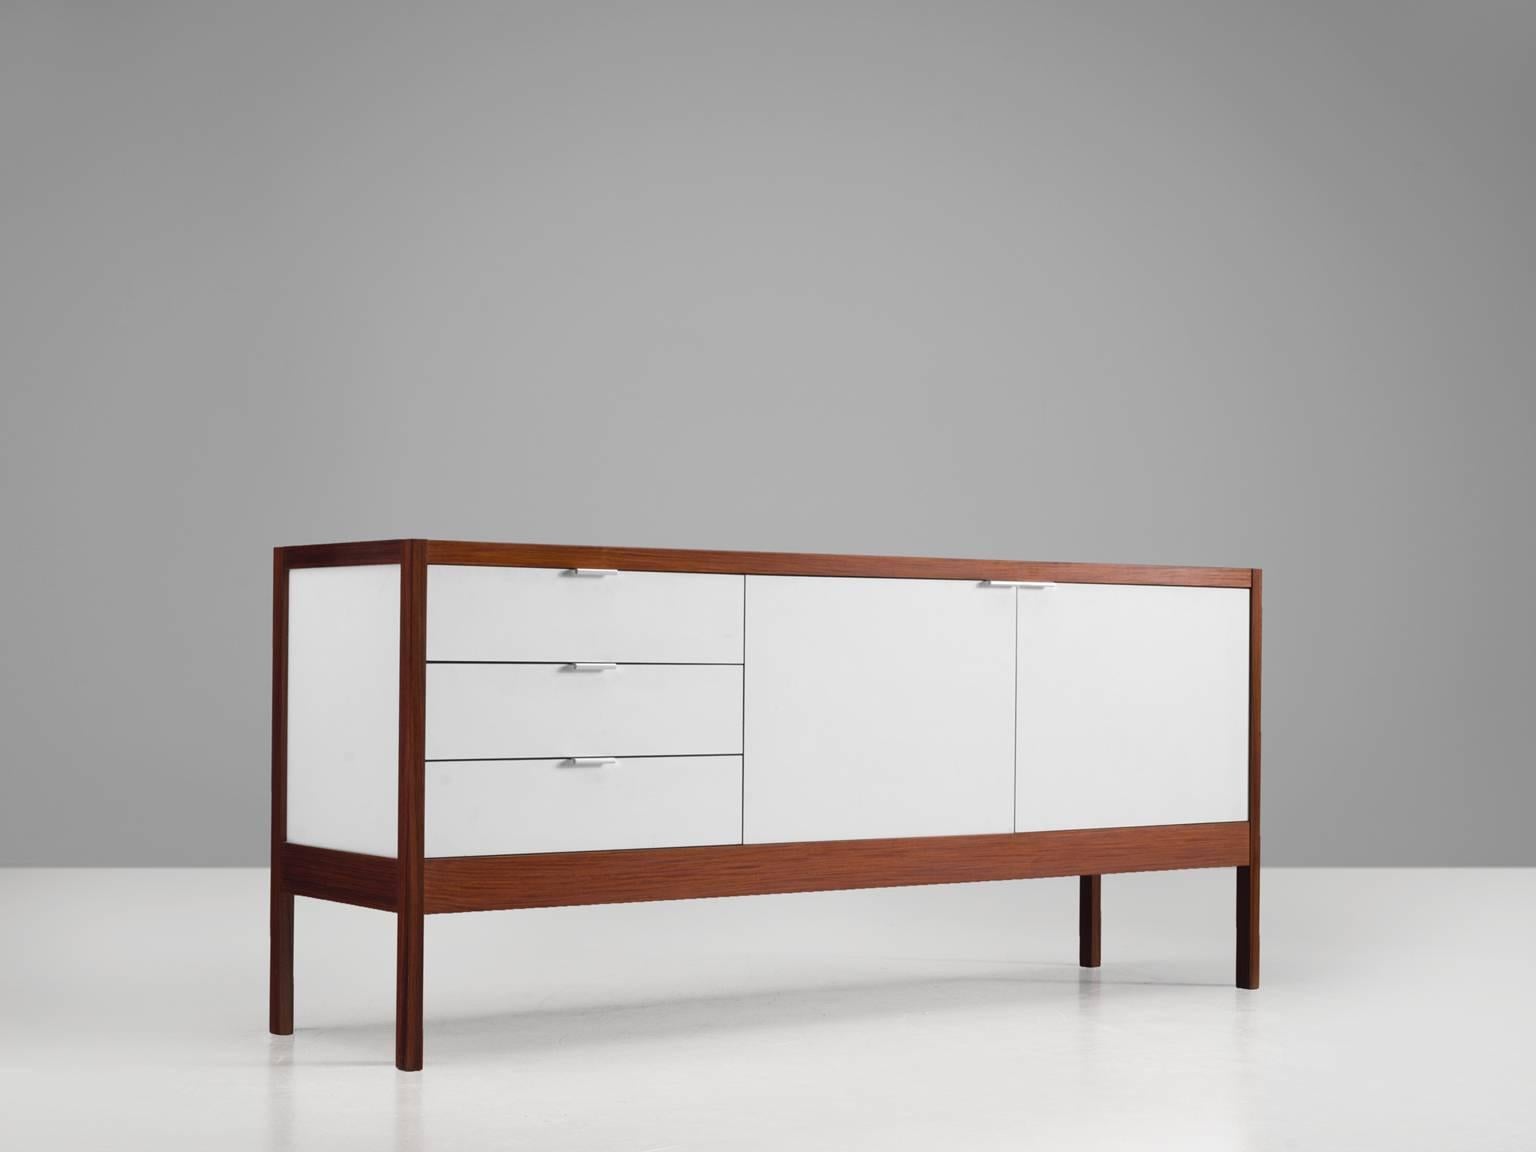 Dieter Waeckerlin for Idealheim, white formica, rosewood, Switzerland, design 1963, later production

This sideboard is designed by Dieter Waeckerlin for Idealheim and was produced in small numbers only. The credenza features clean lines and a